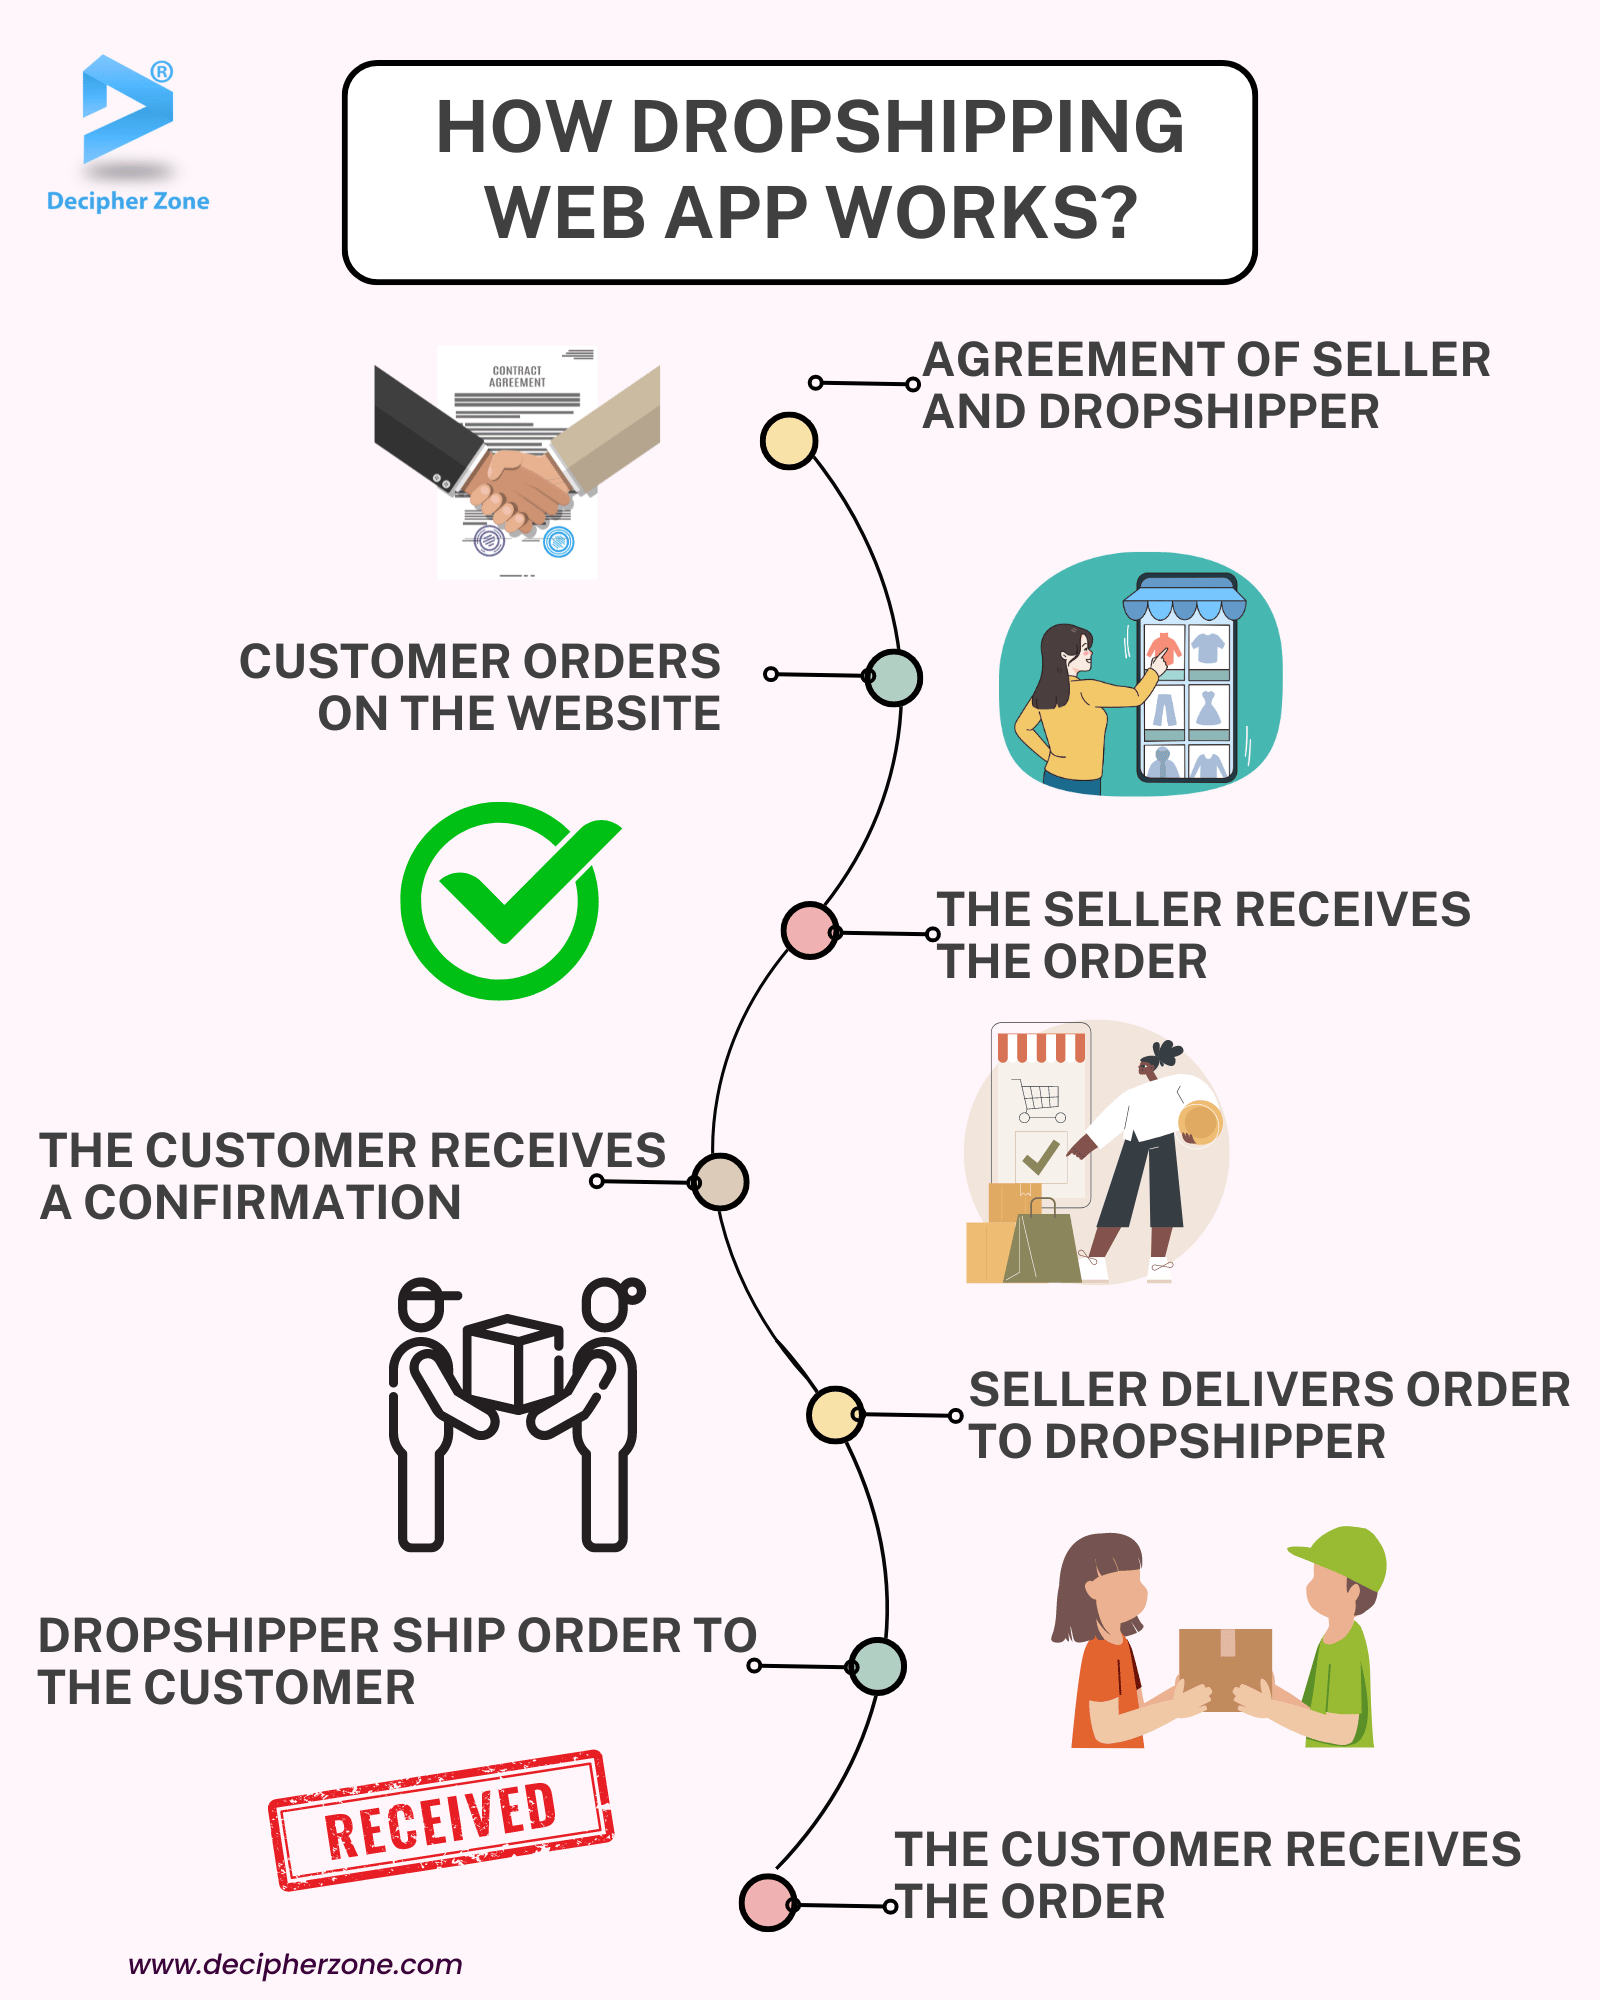 How Does a Dropshipping Web App Work?